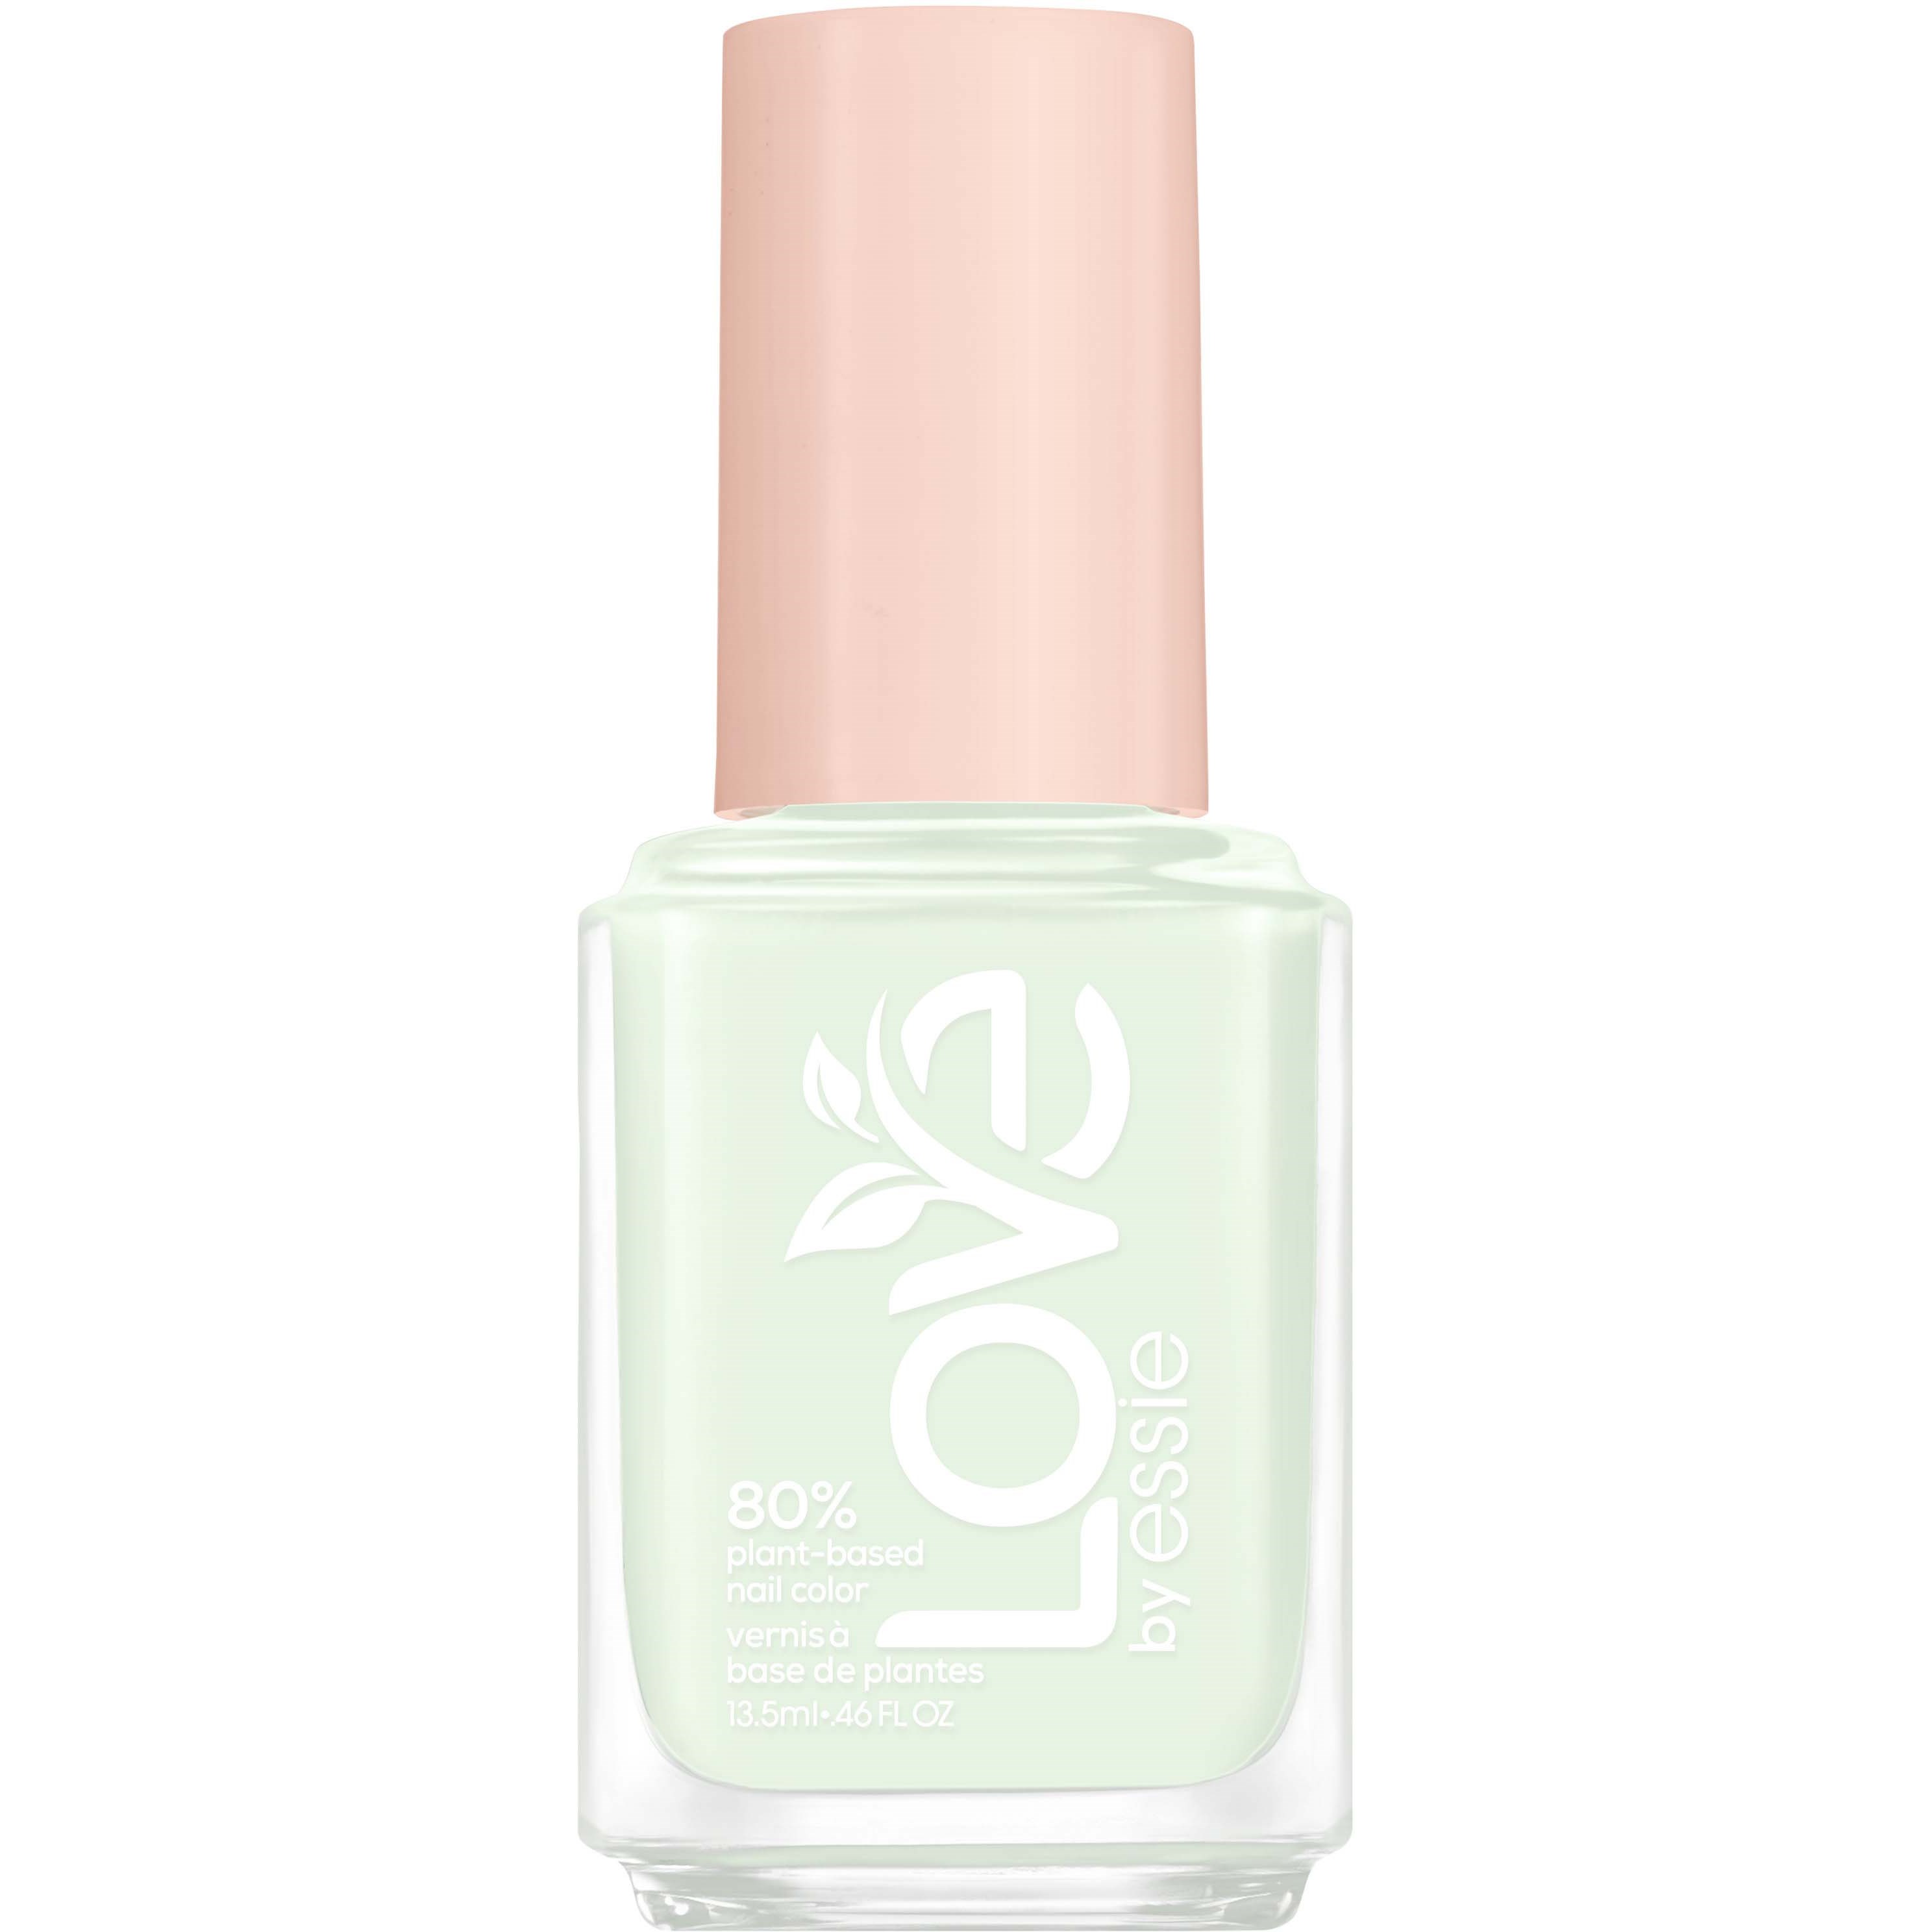 Läs mer om Essie LOVE by Essie 80% Plant-based Nail Color 220 Revive To Thrive